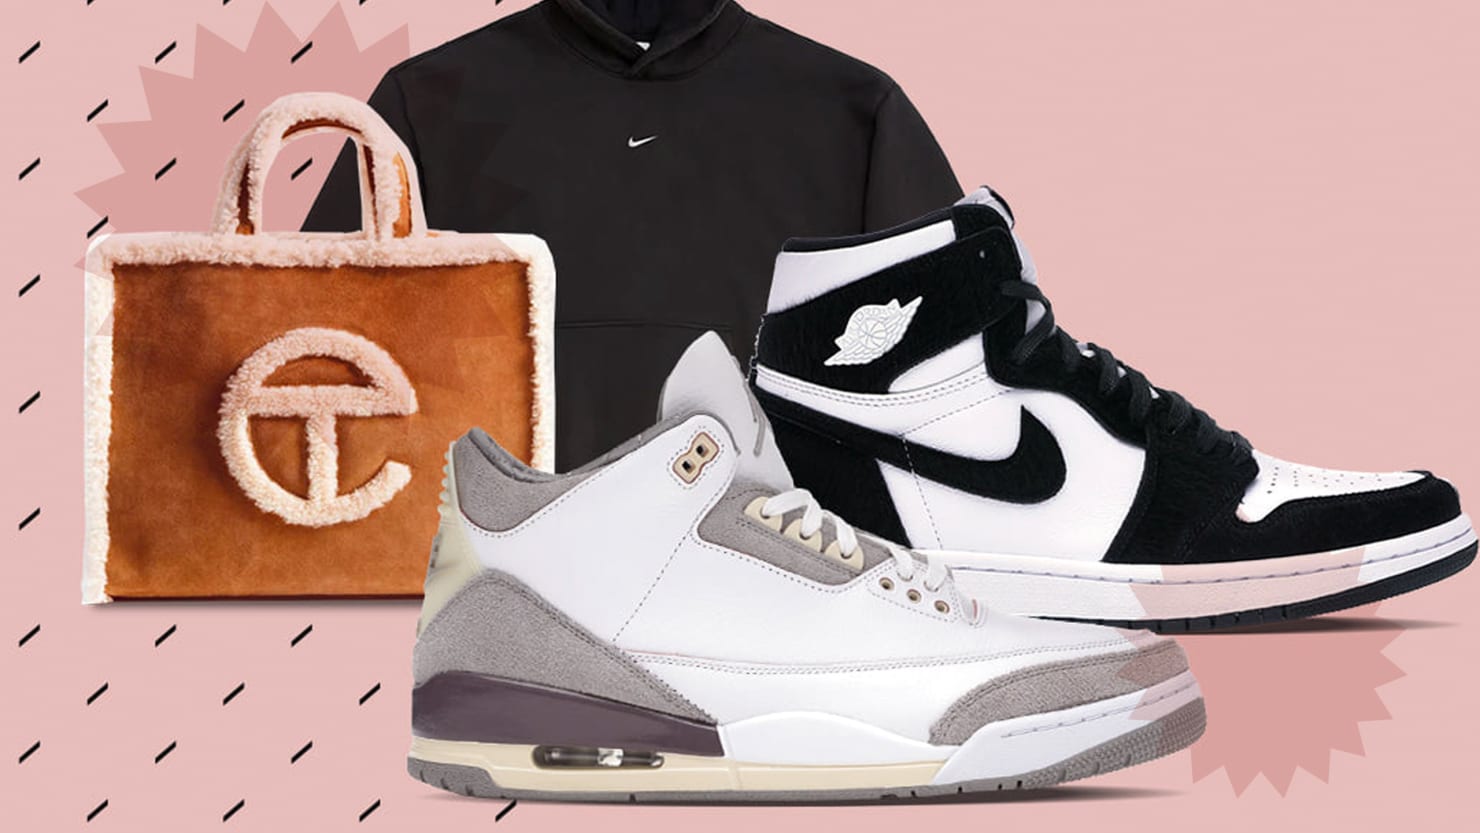 Savvy shopper turns her $150 Nike sneakers into Louis Vuitton